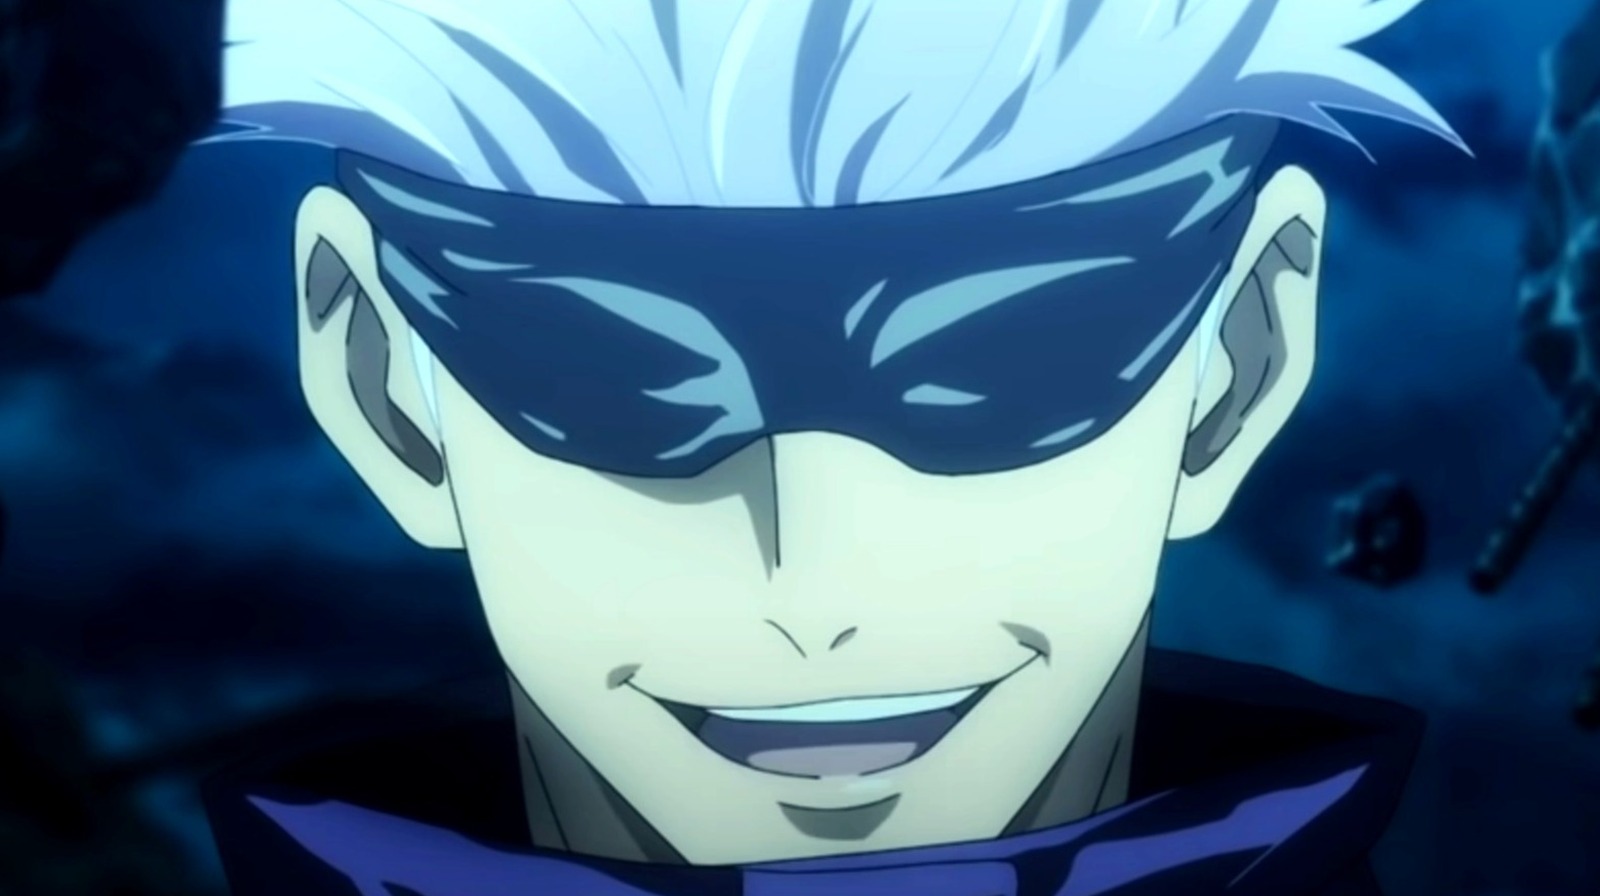 Anime guy with blindfold and white hair